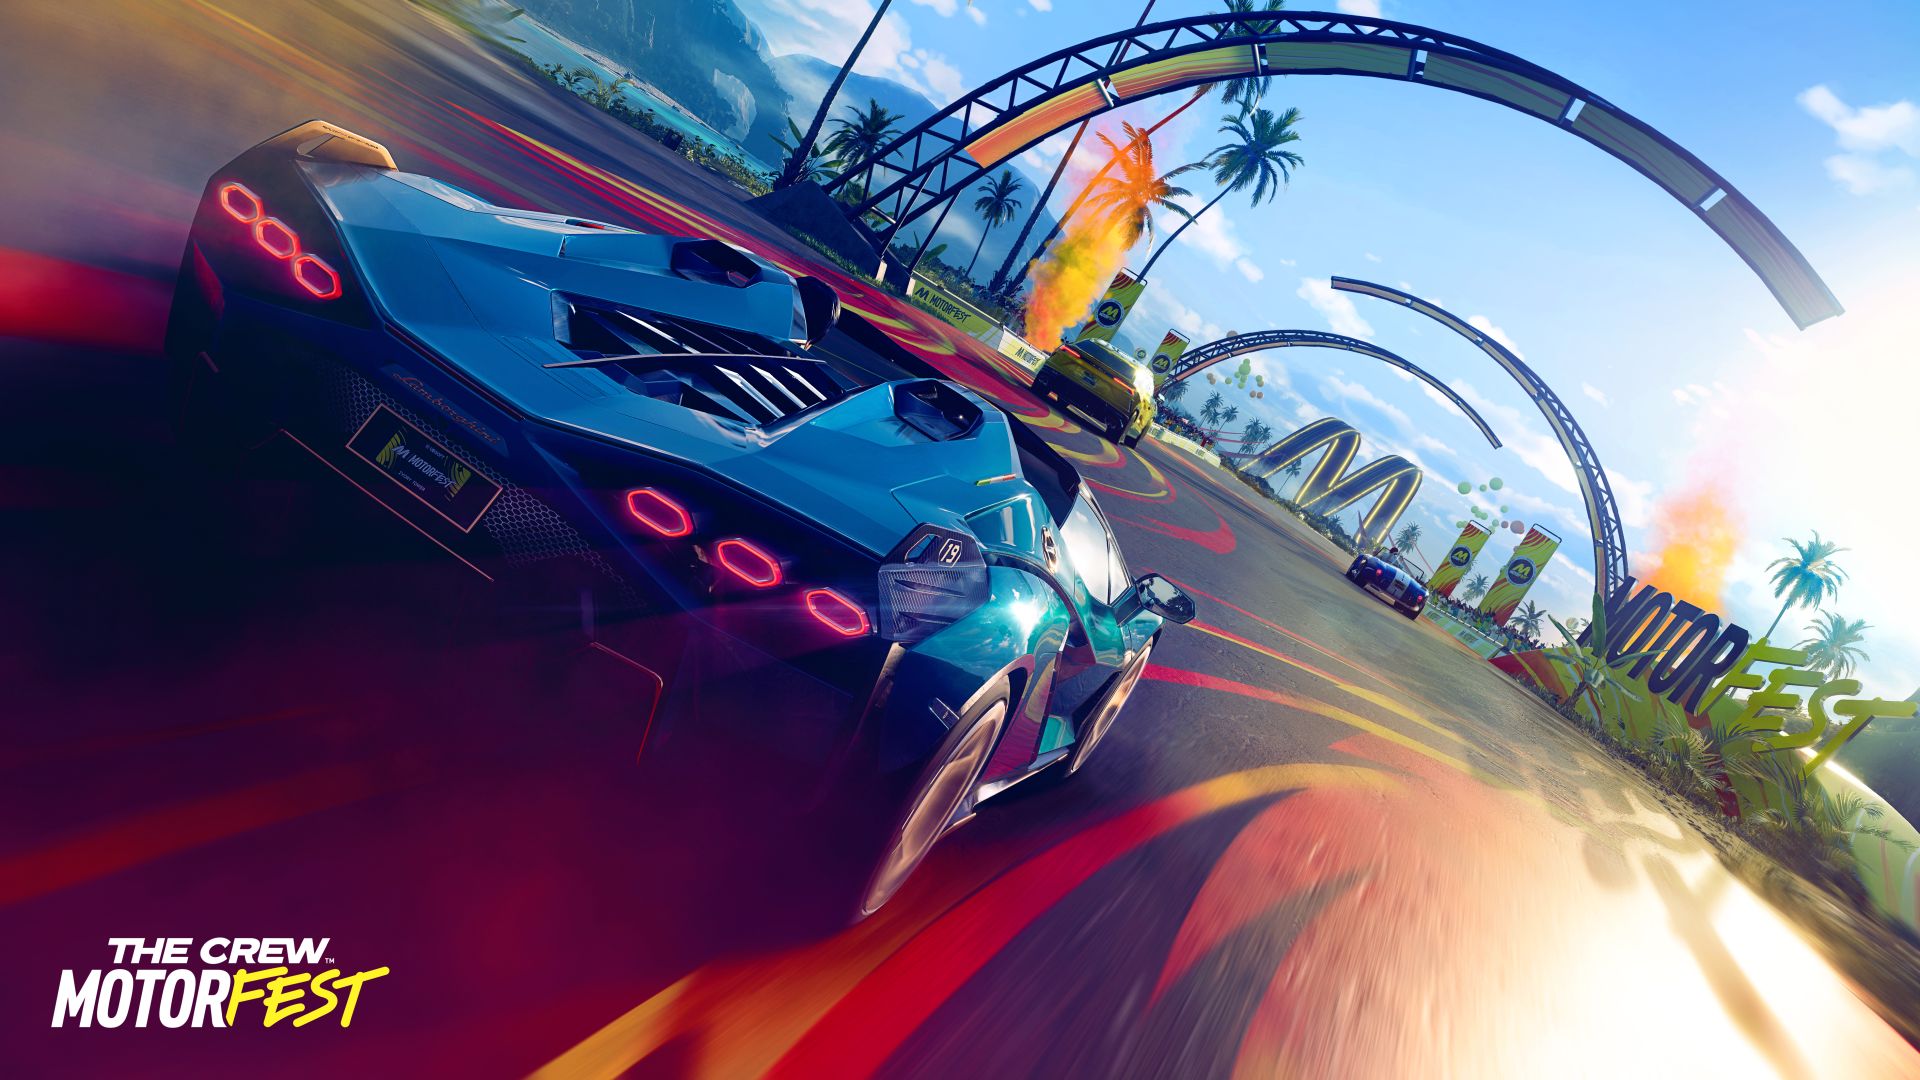 Ubisoft confirms The Crew Motorfest release date - the adventure race will be released on September 14